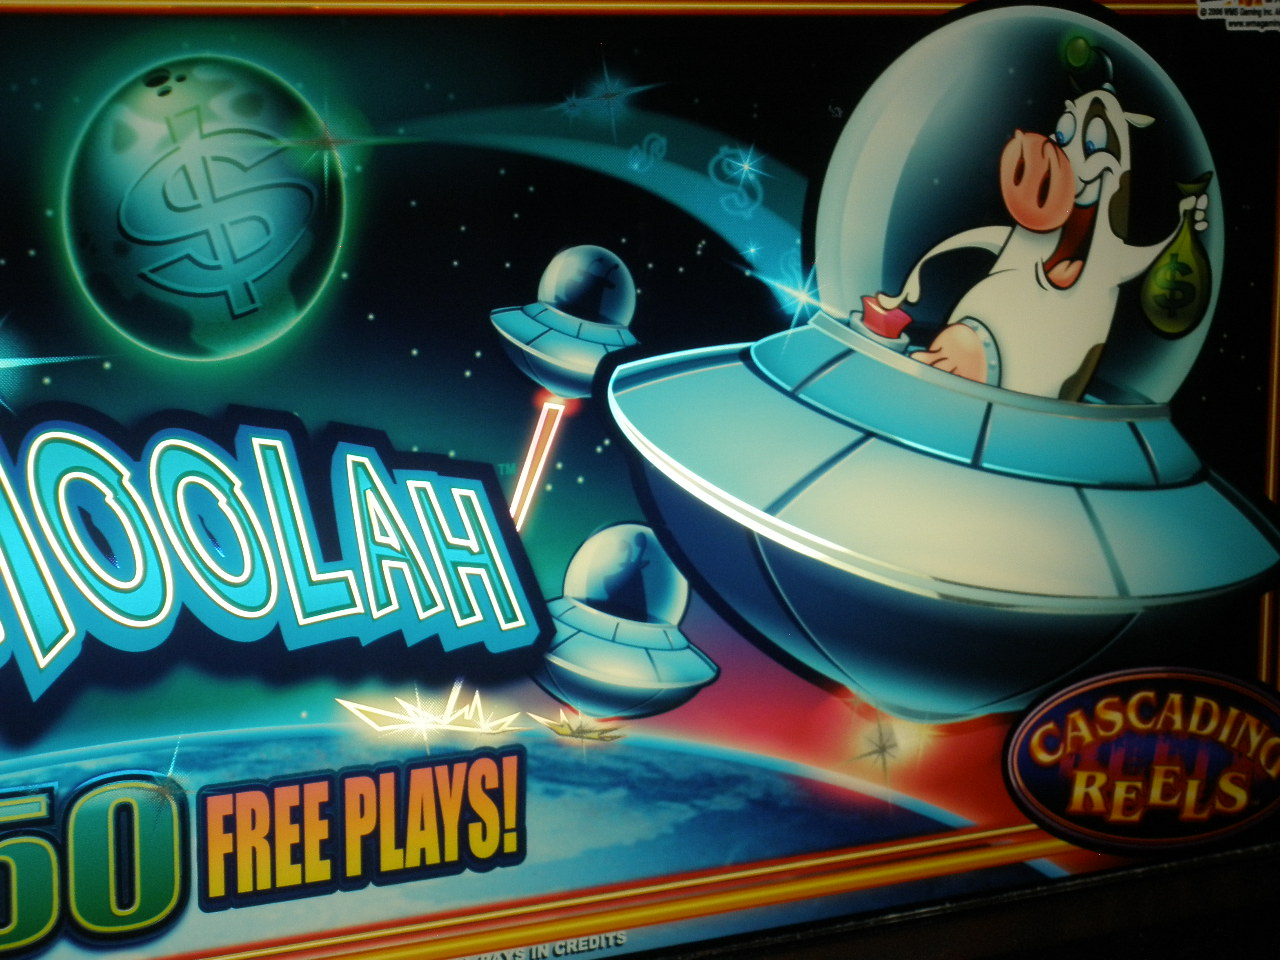 invaders from planet moolah app